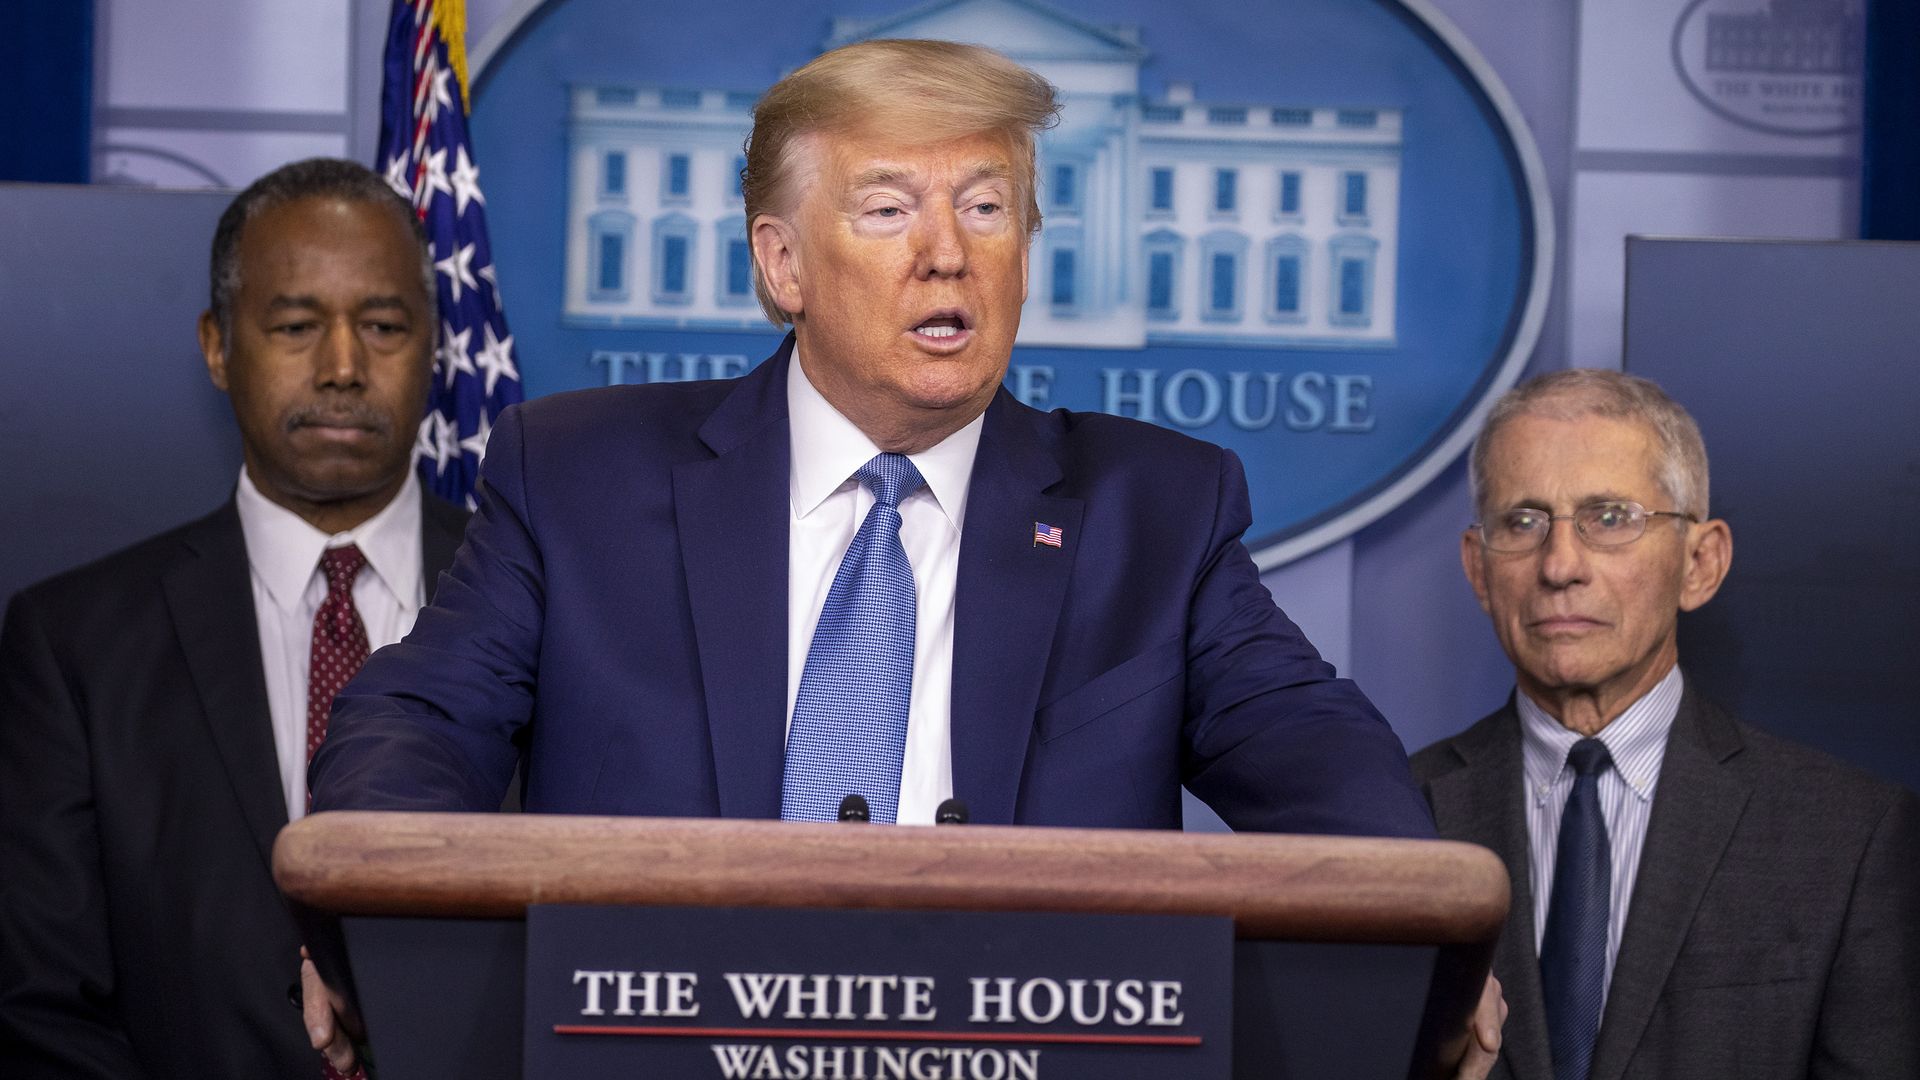 President Donald Trump speaks during a briefing in the James Brady Press Briefing Room at the White House on March 21